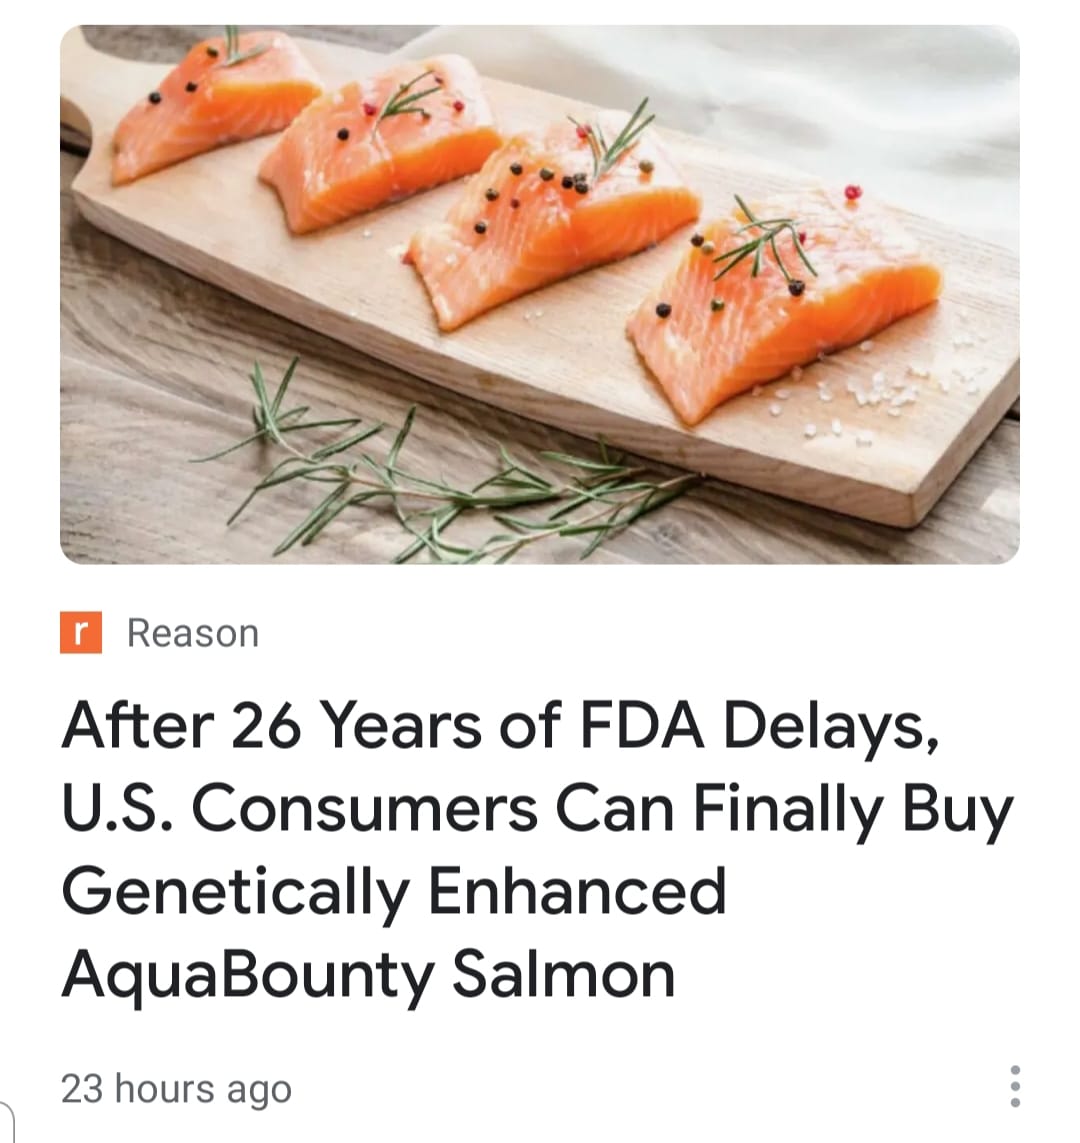 May be an image of text that says 'r Reason After 26 Years of FDA Delays, U.S. Consumers Can Finally Buy Genetically Enhanced AquaBounty Salmon 23 hours ago'